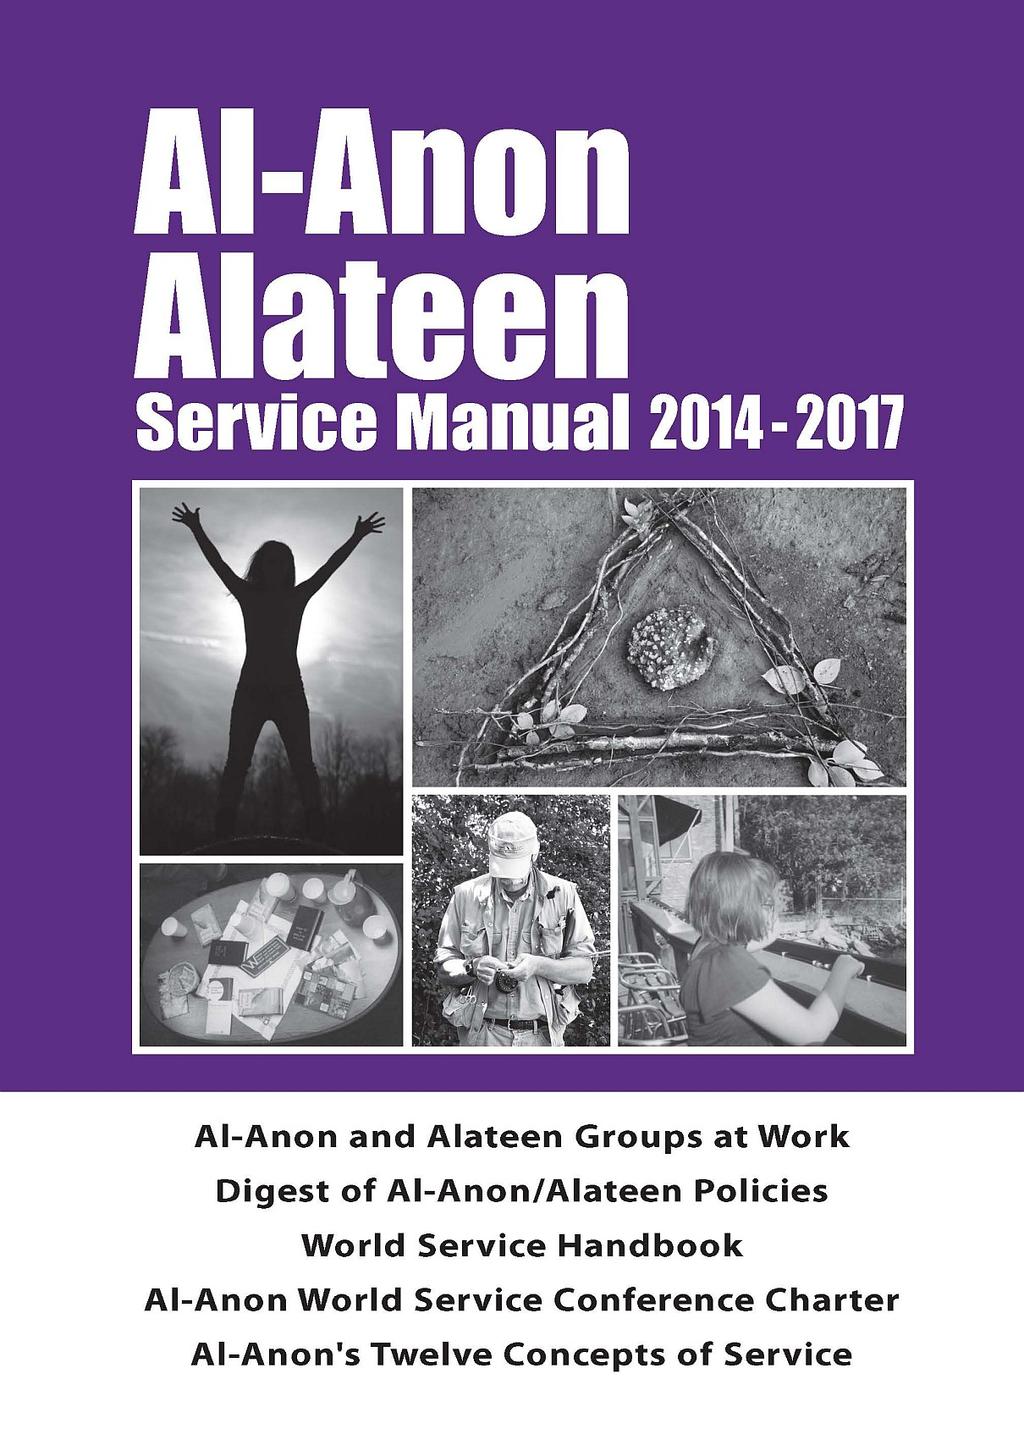 Al-Anon/Alateen Service Manual Quiz This game uses the 2014-2017 Al-Anon/Alateen Service Manual (P-24/27).